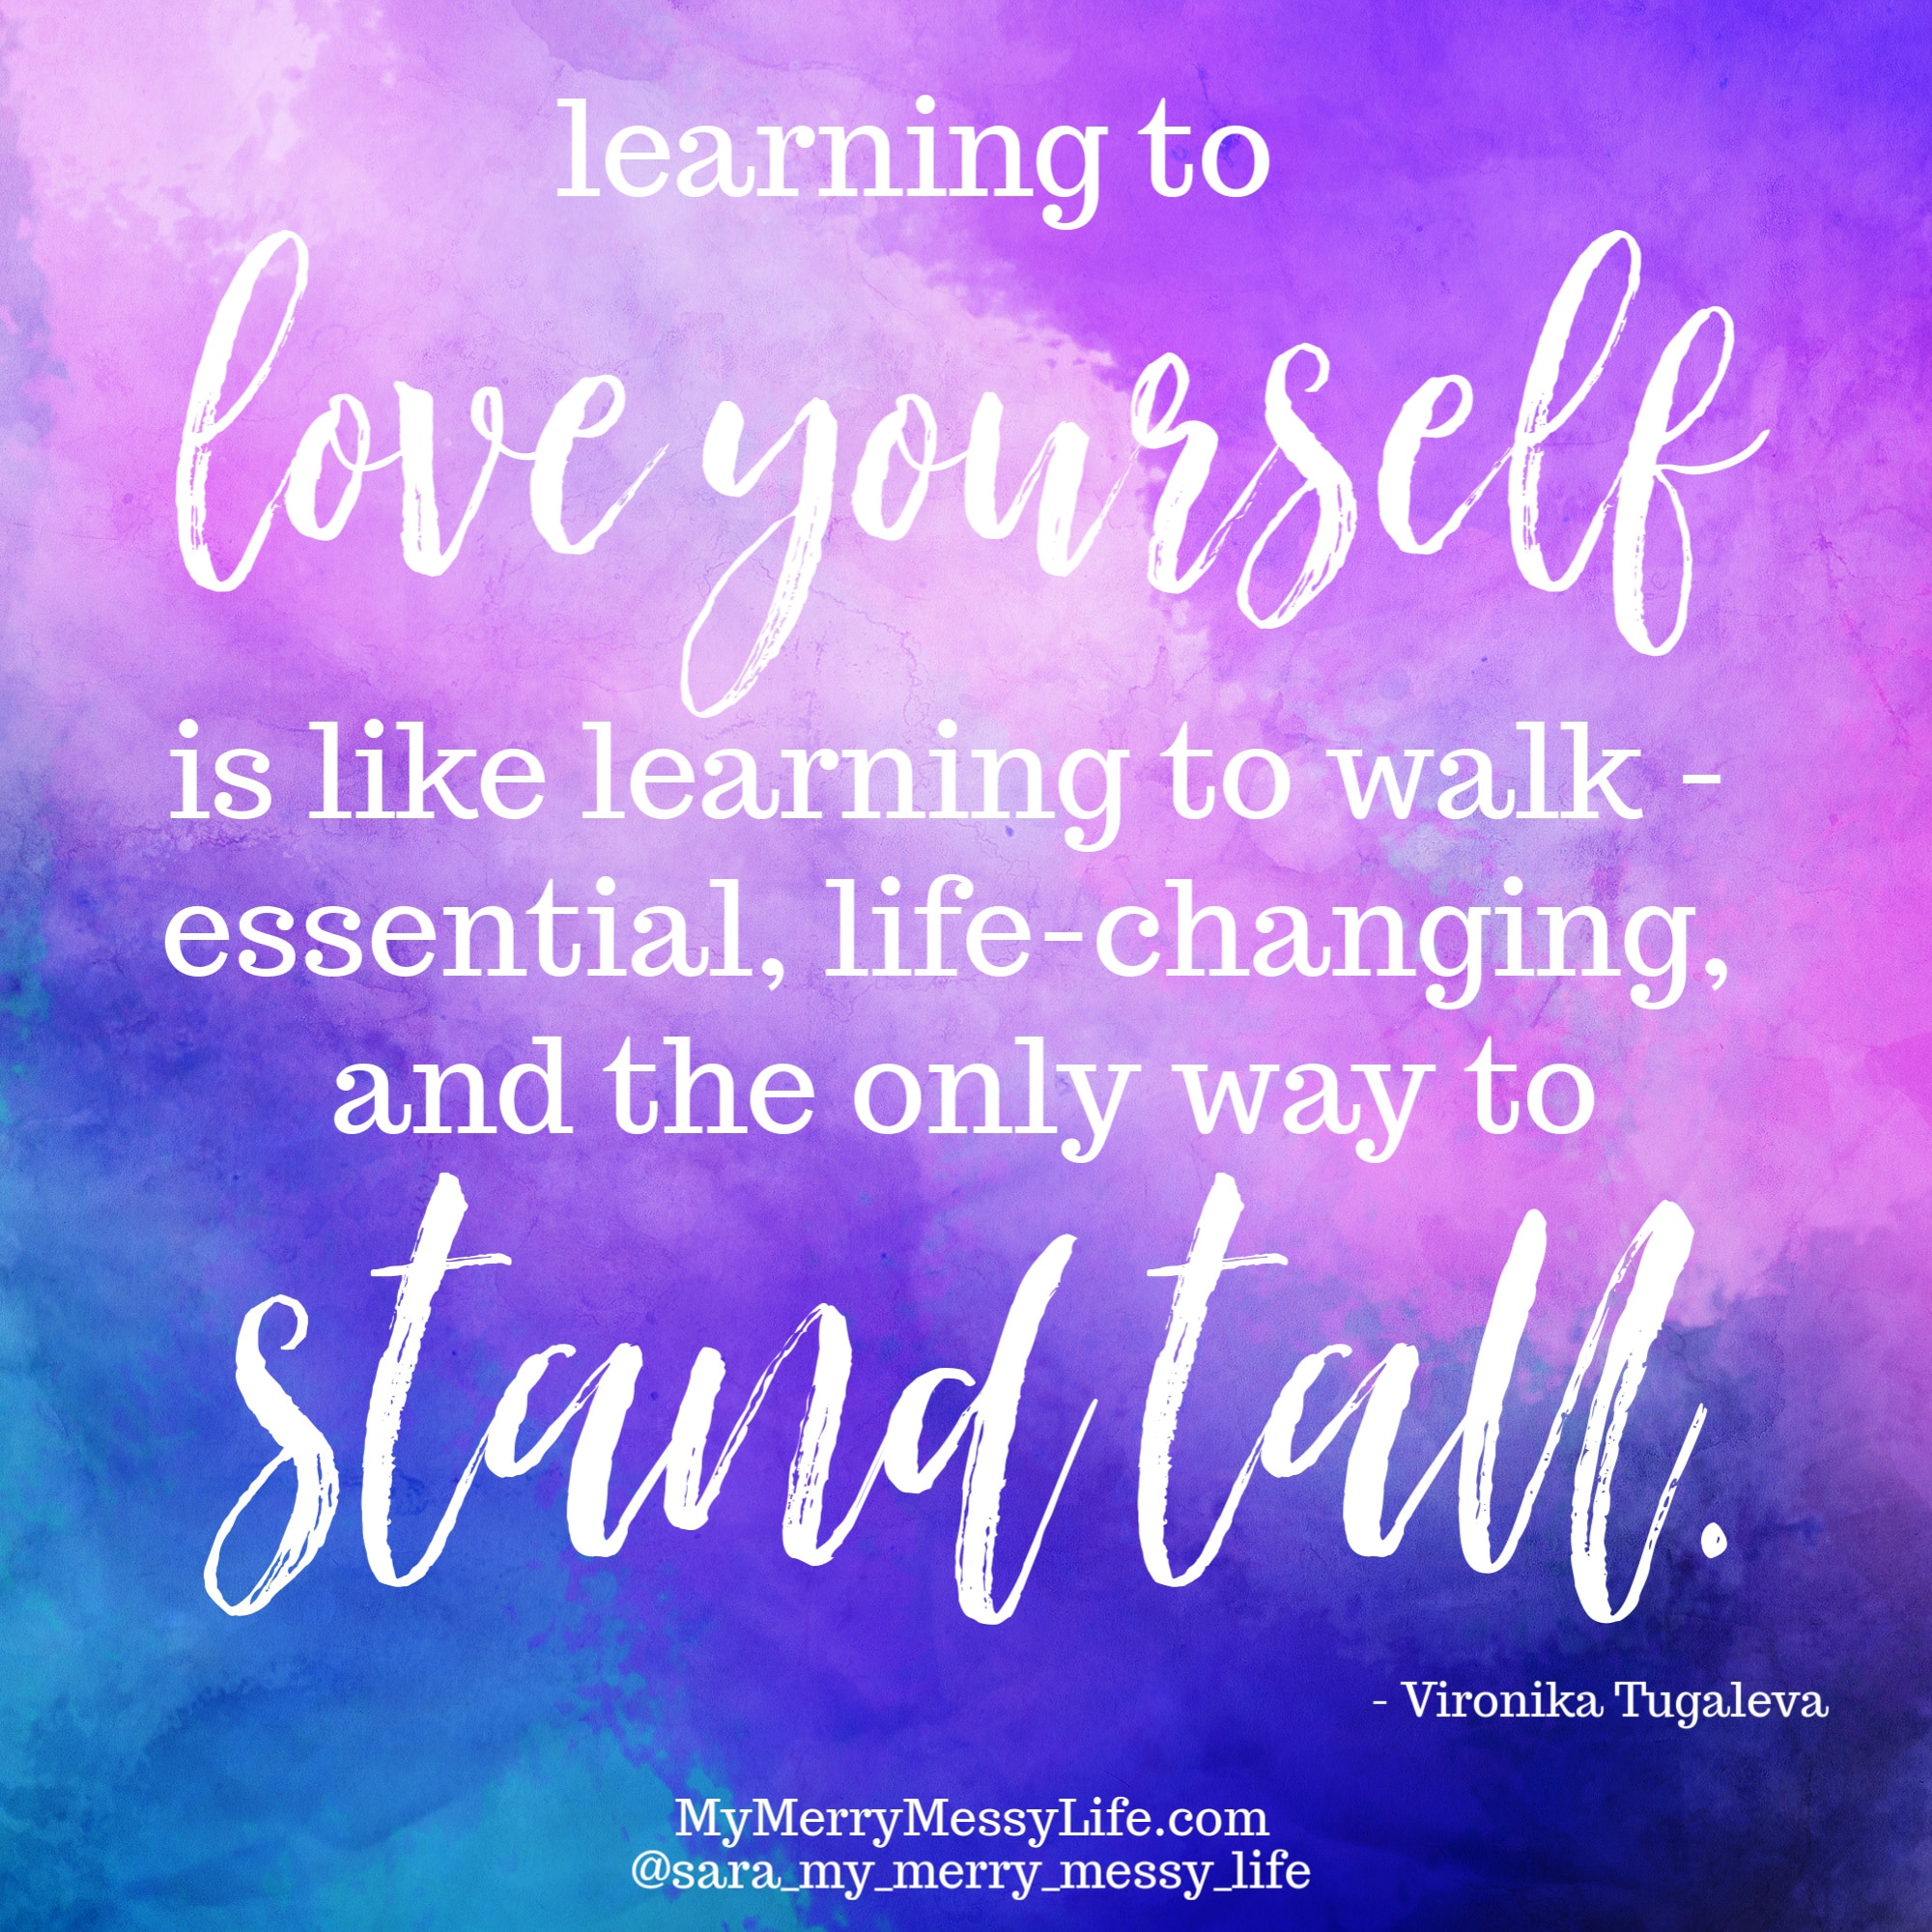 Learning to love yourself is like learning to walk - essential, life-changing, and the only way to stand tall. 